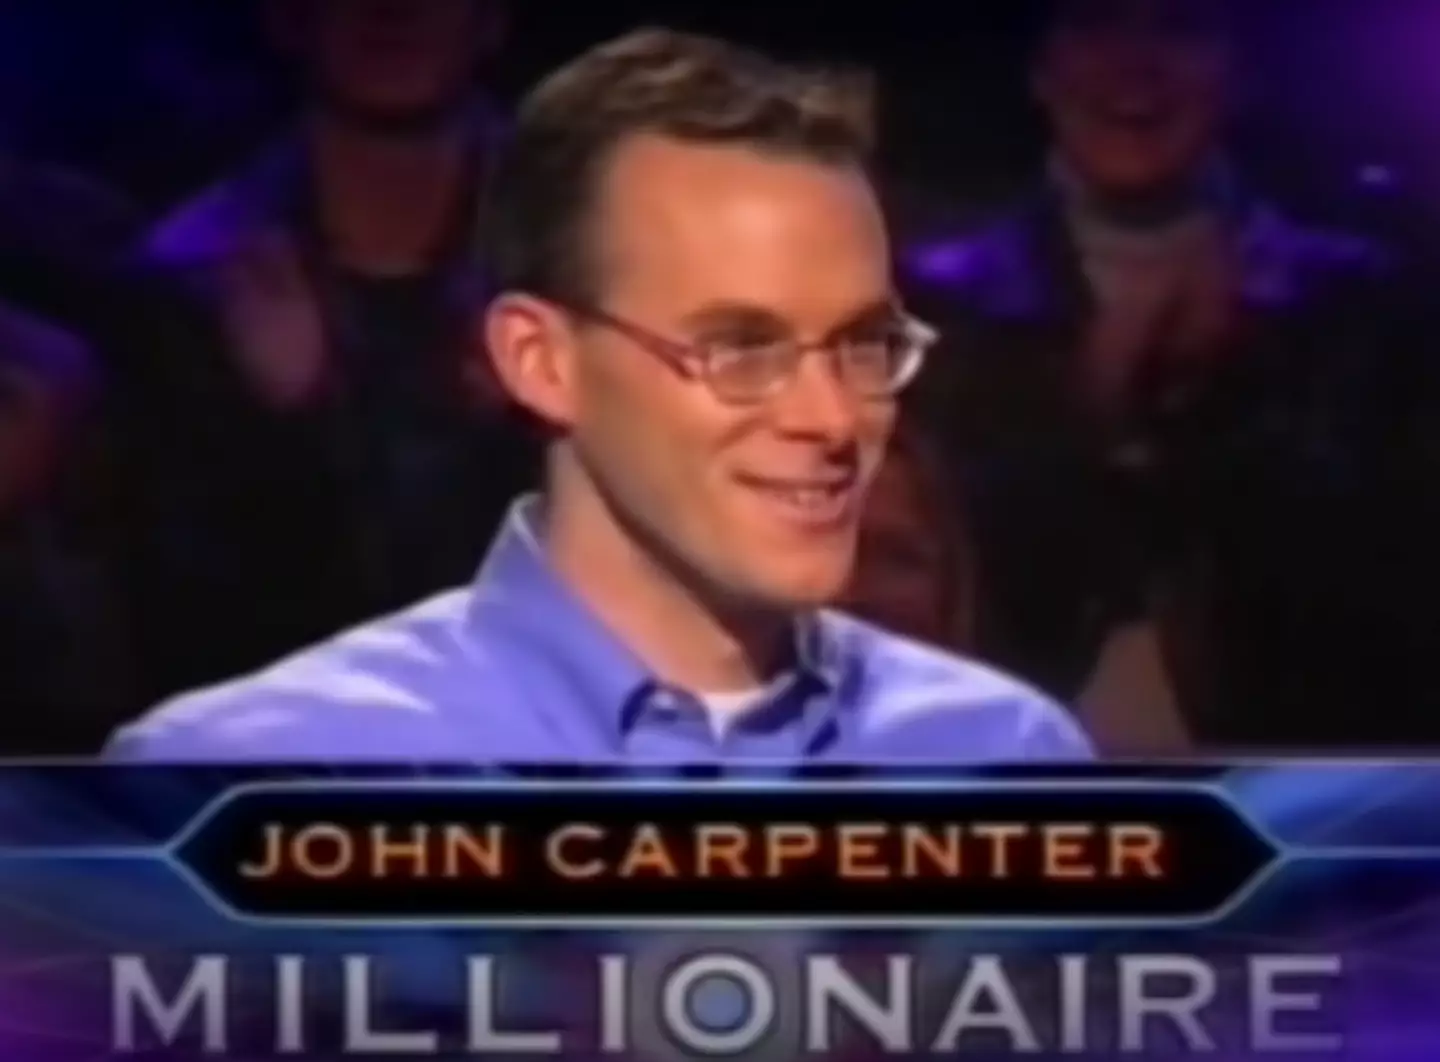 Carpenter managed to get to the final question without needing any of his lifelines.